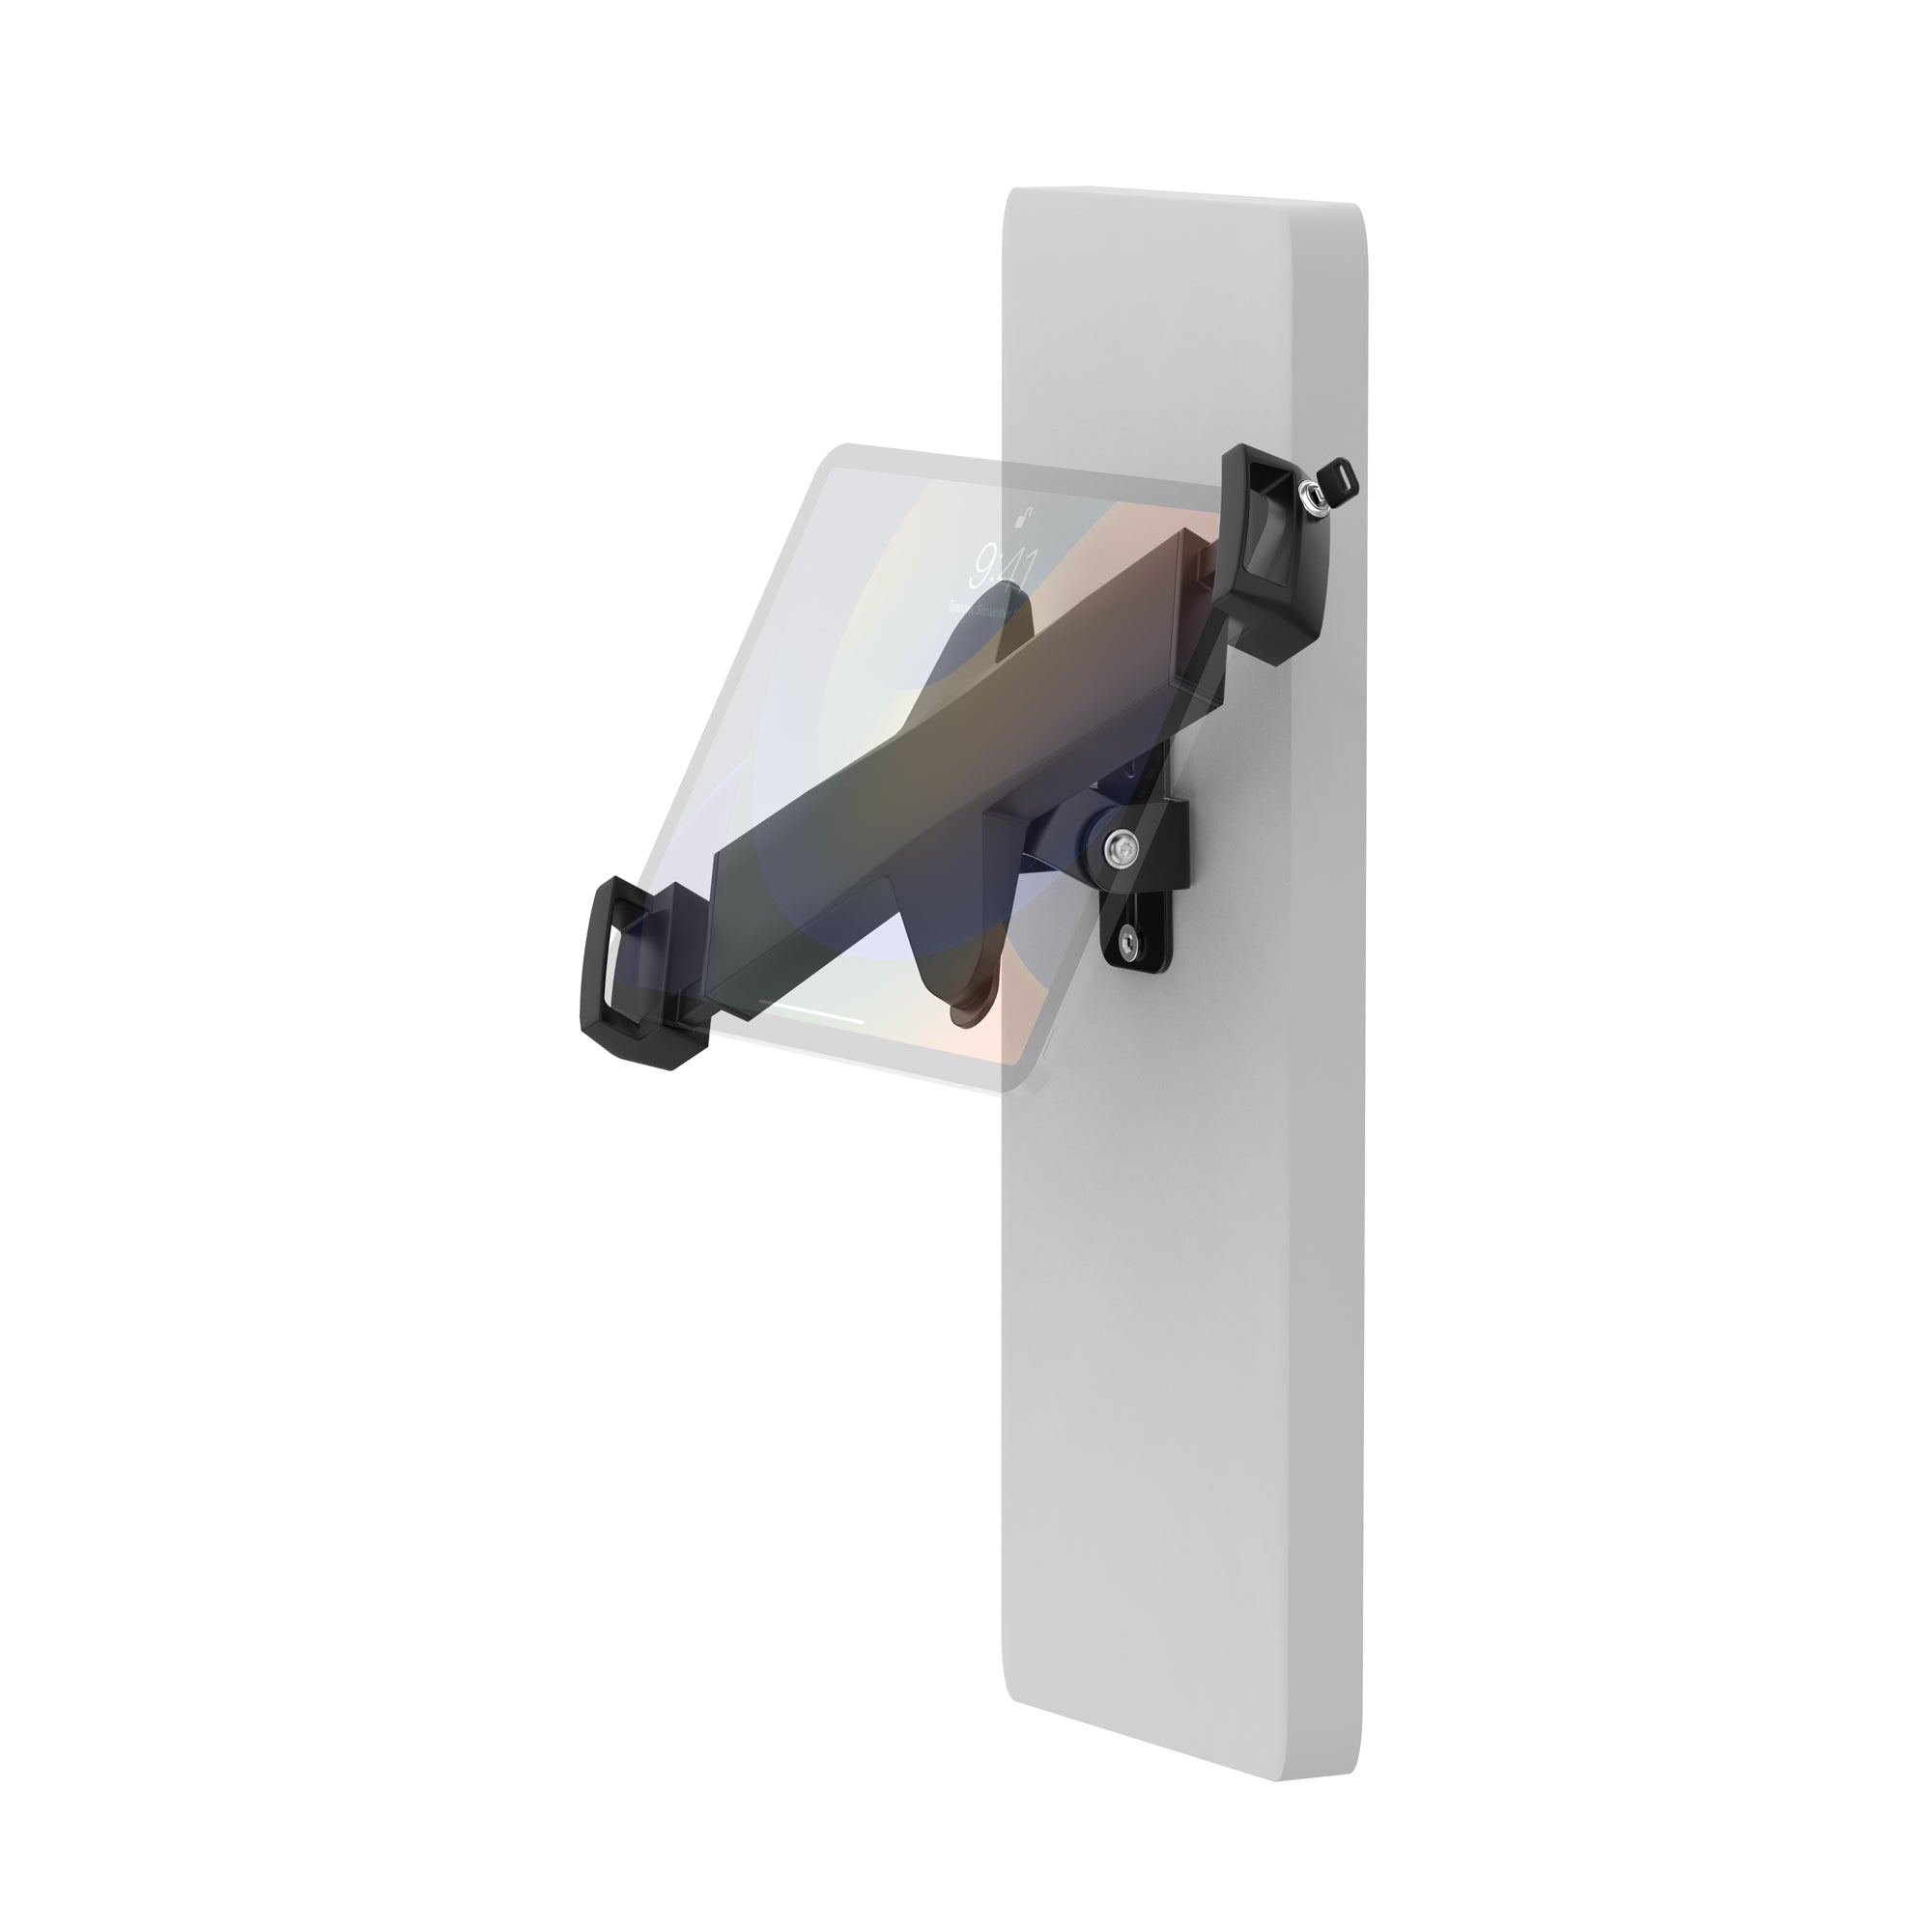 Universal Security Tablet Holder Mount for Poles, Beams, & Corners